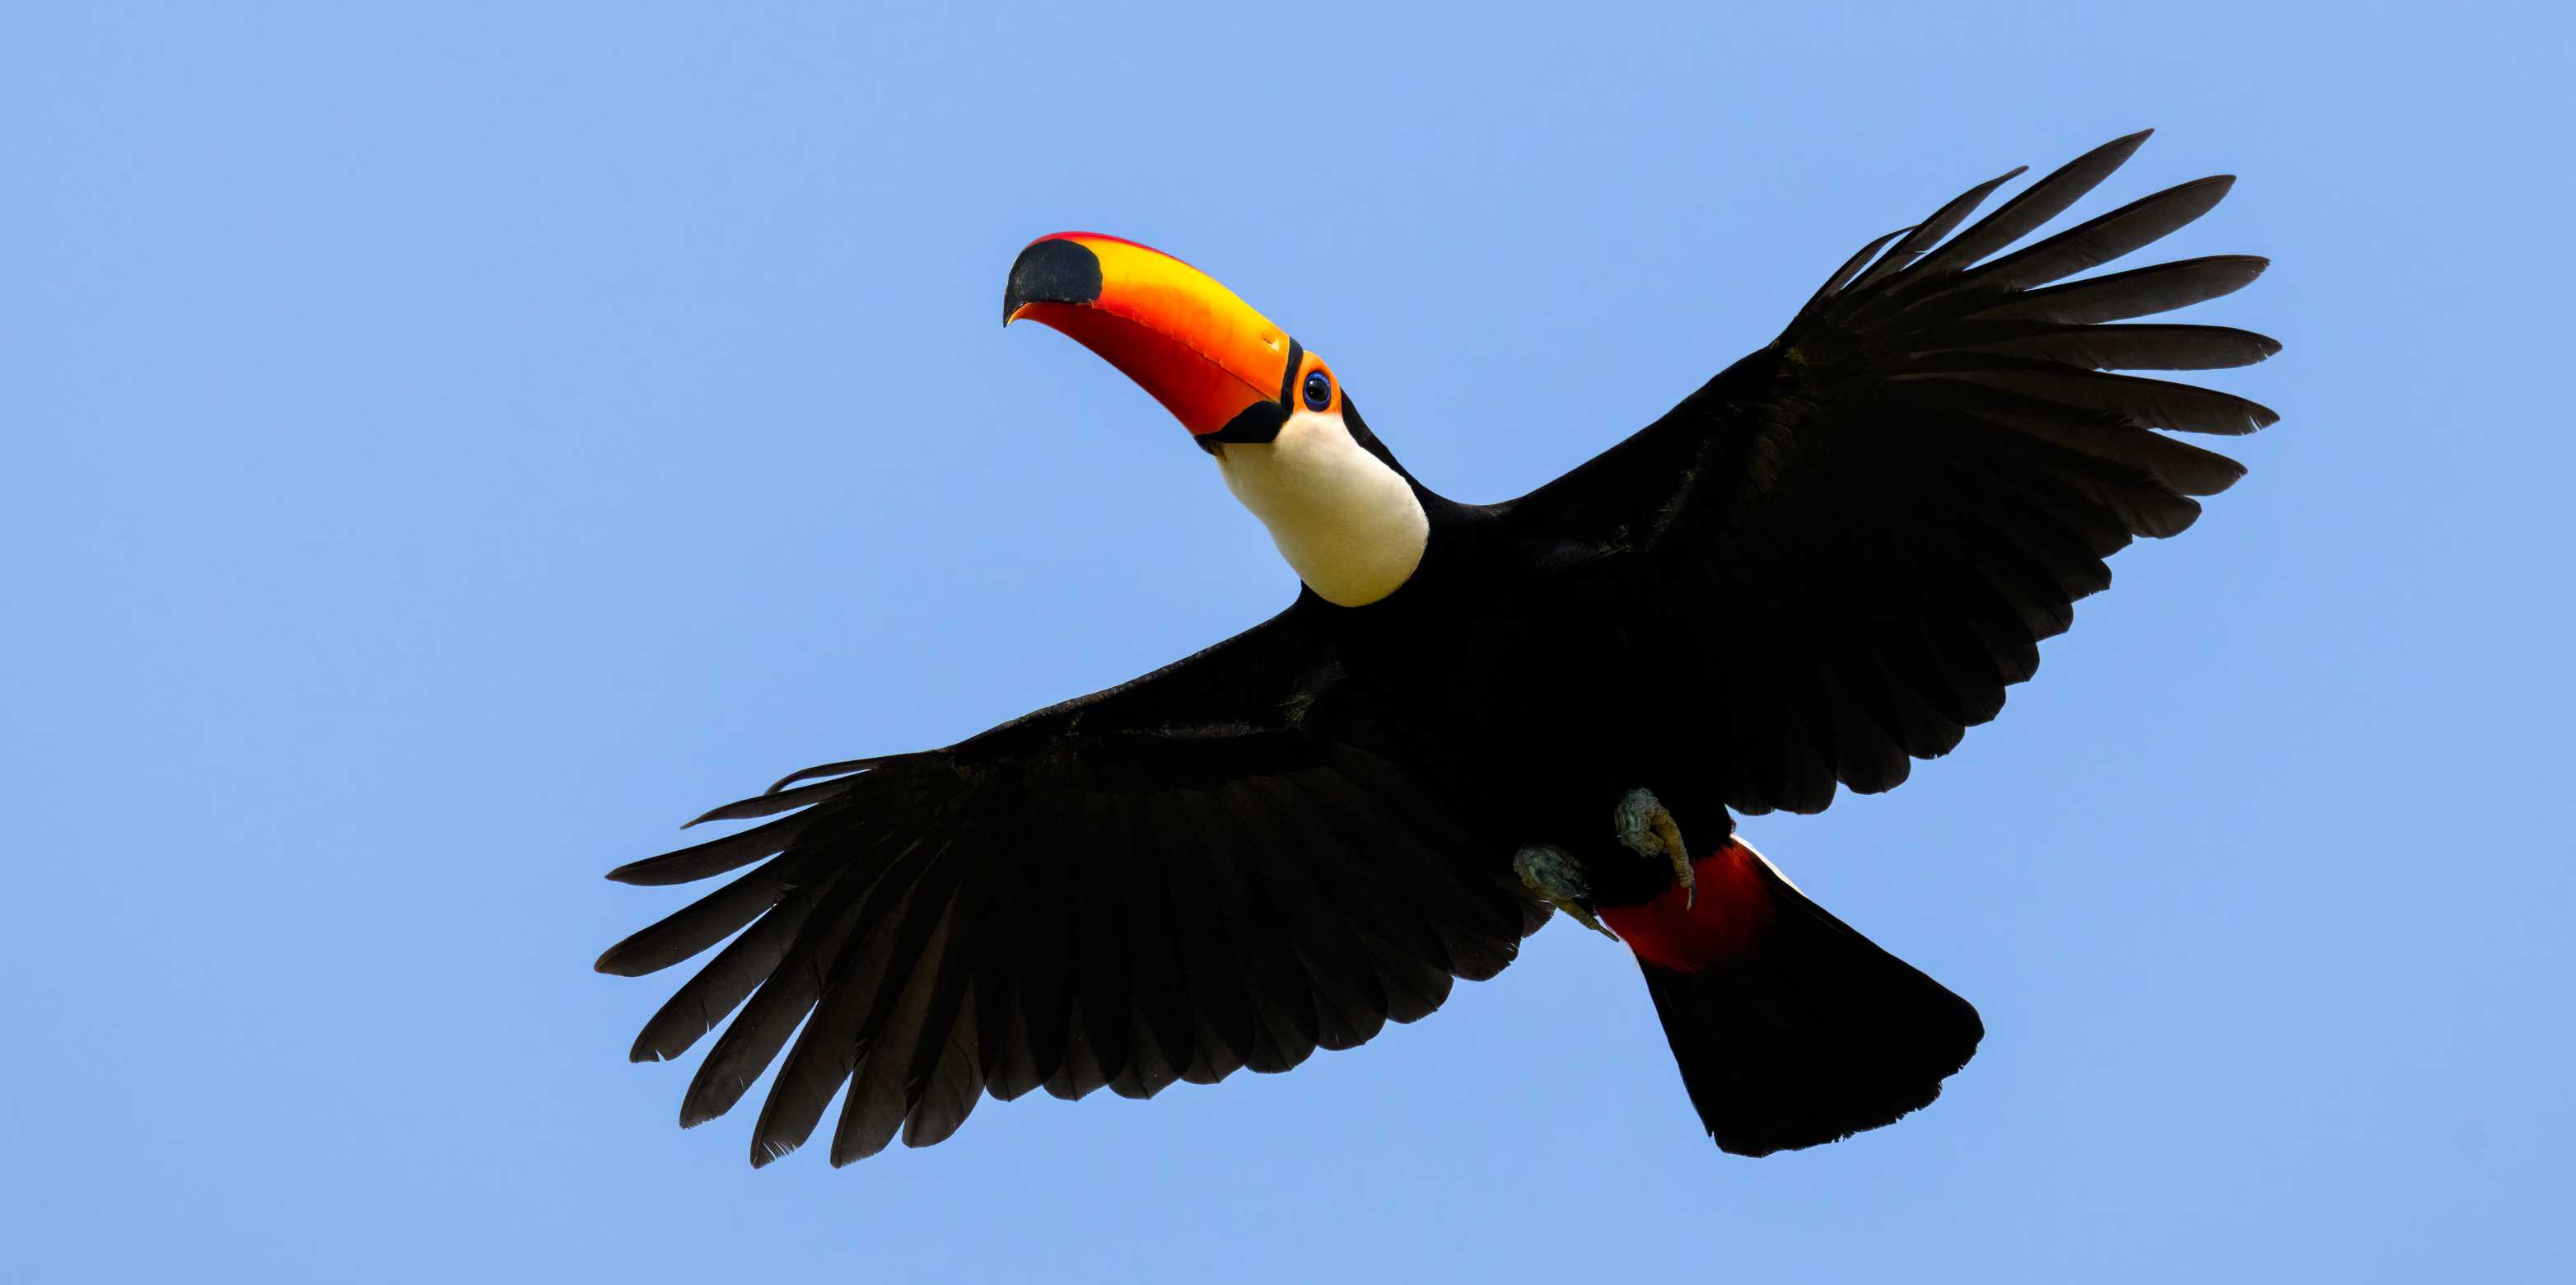 Toco Toucan in flight against a blue sky